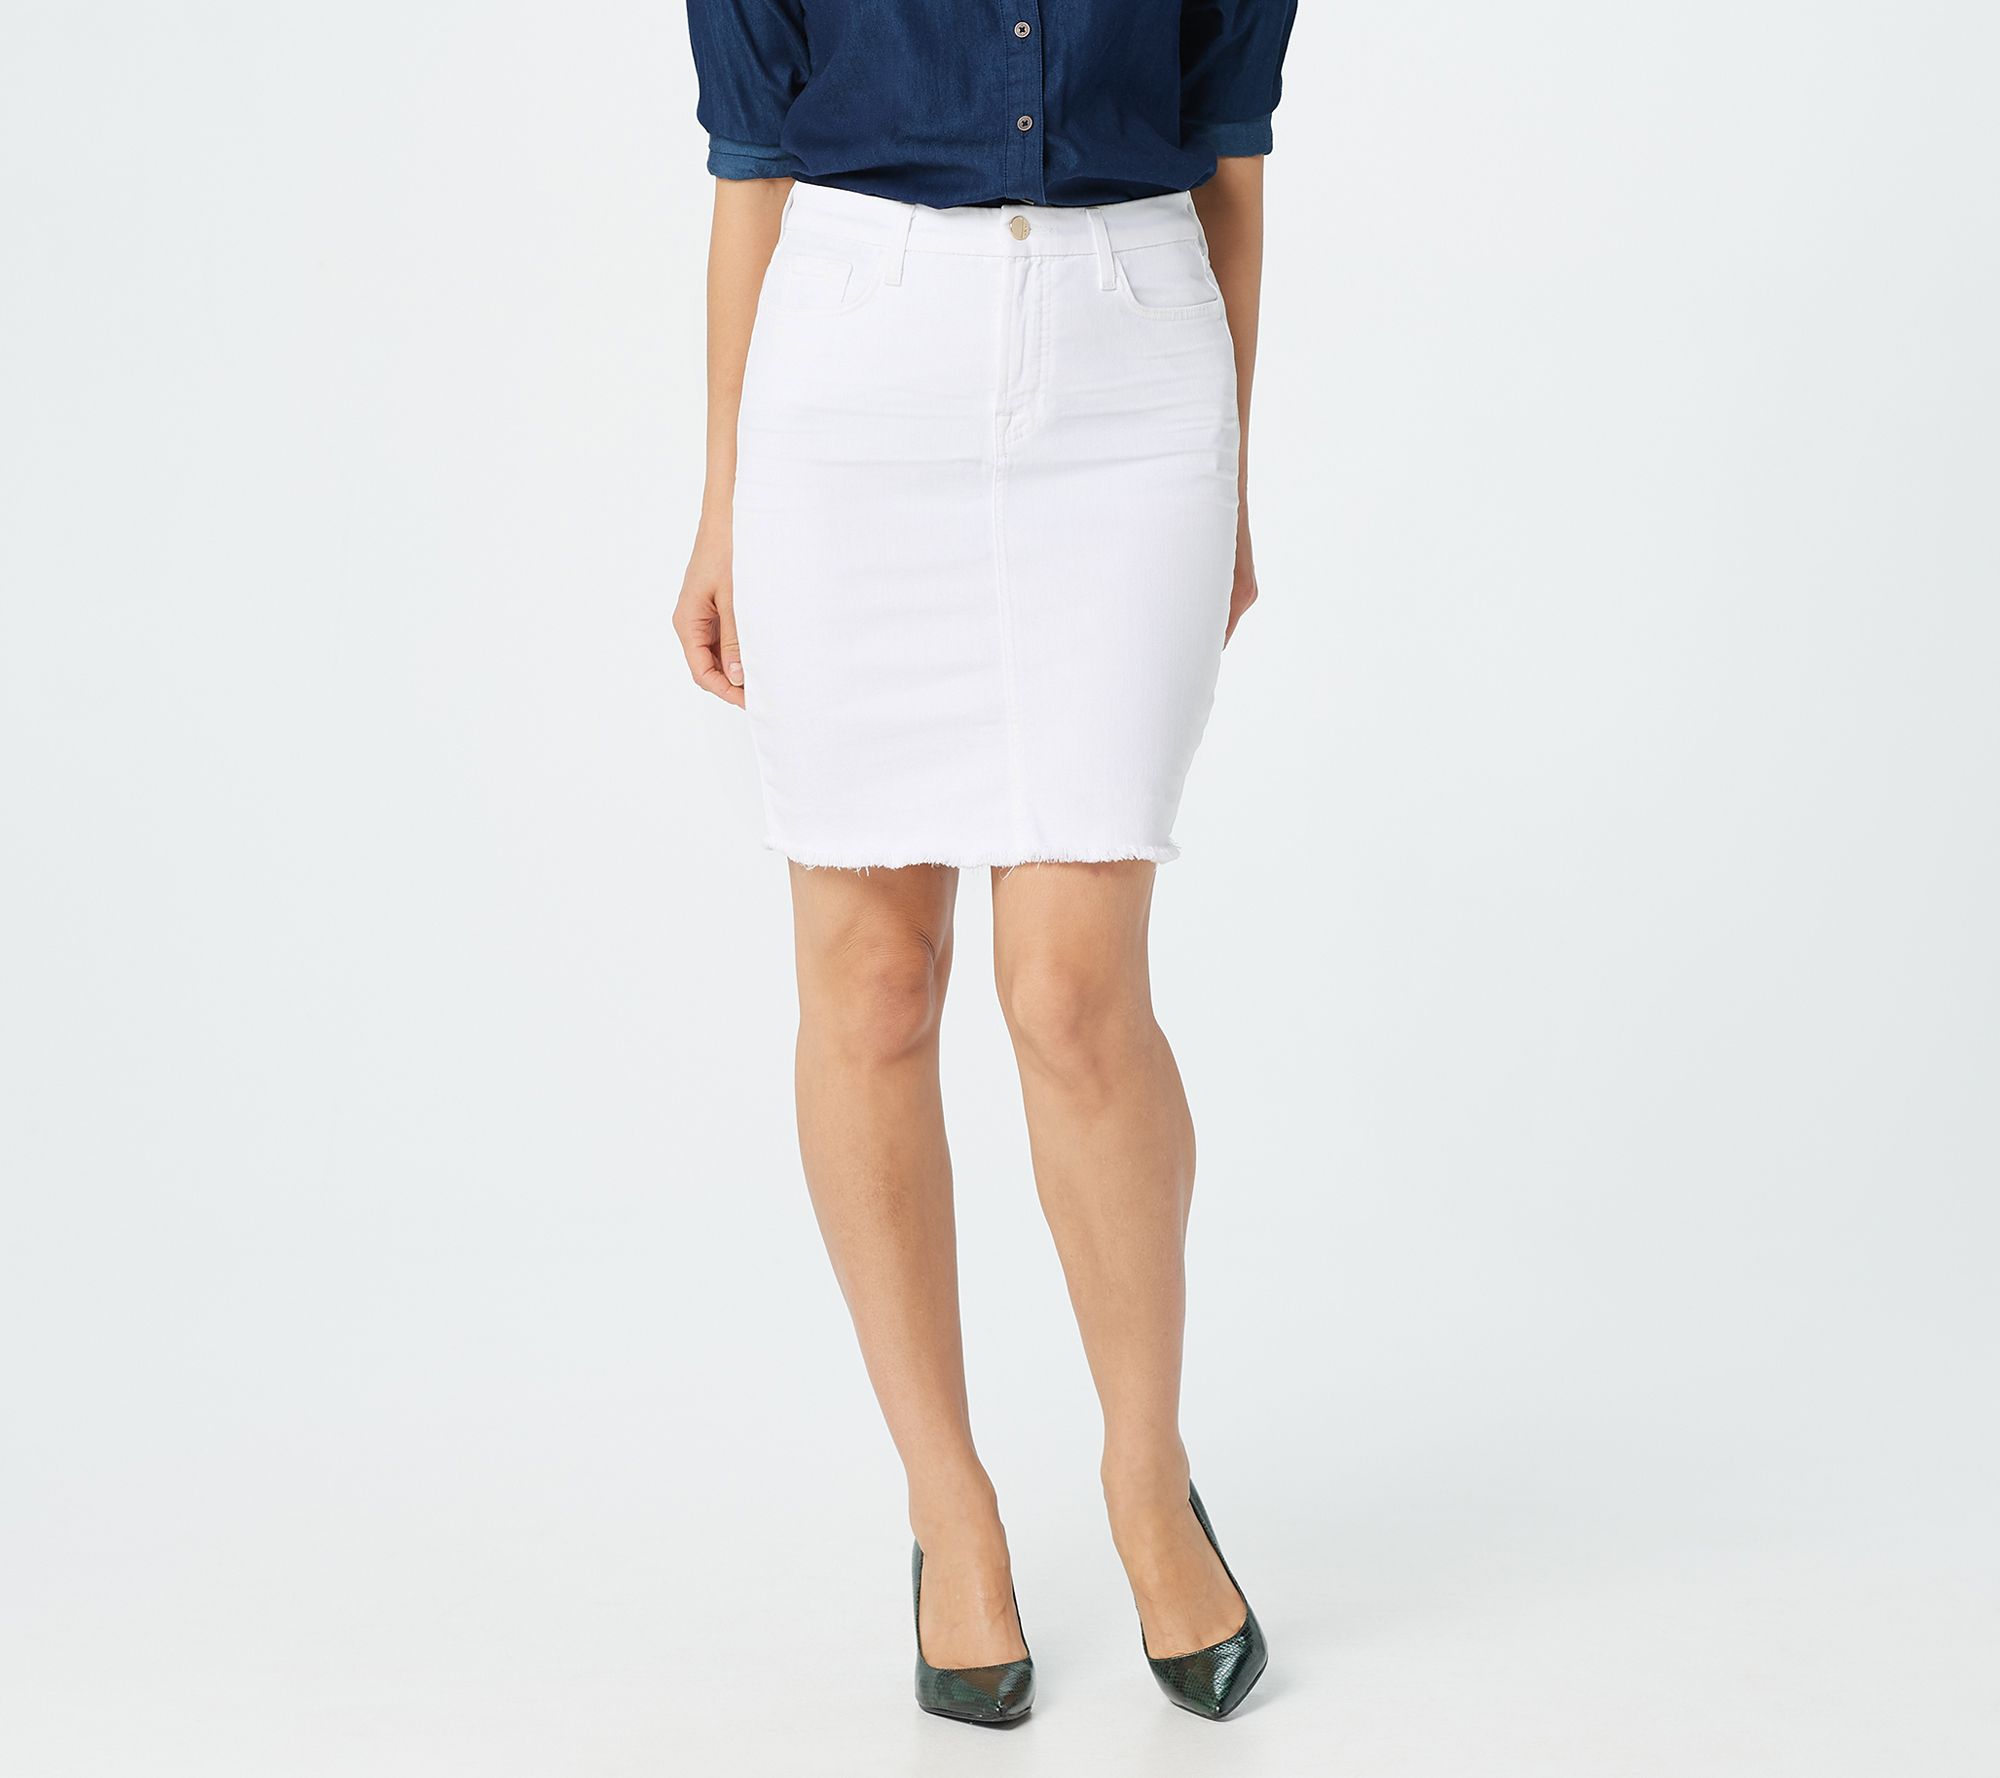 Jen7 by 7 for All Mankind Pencil Skirt with Frayed hem - White - QVC.com